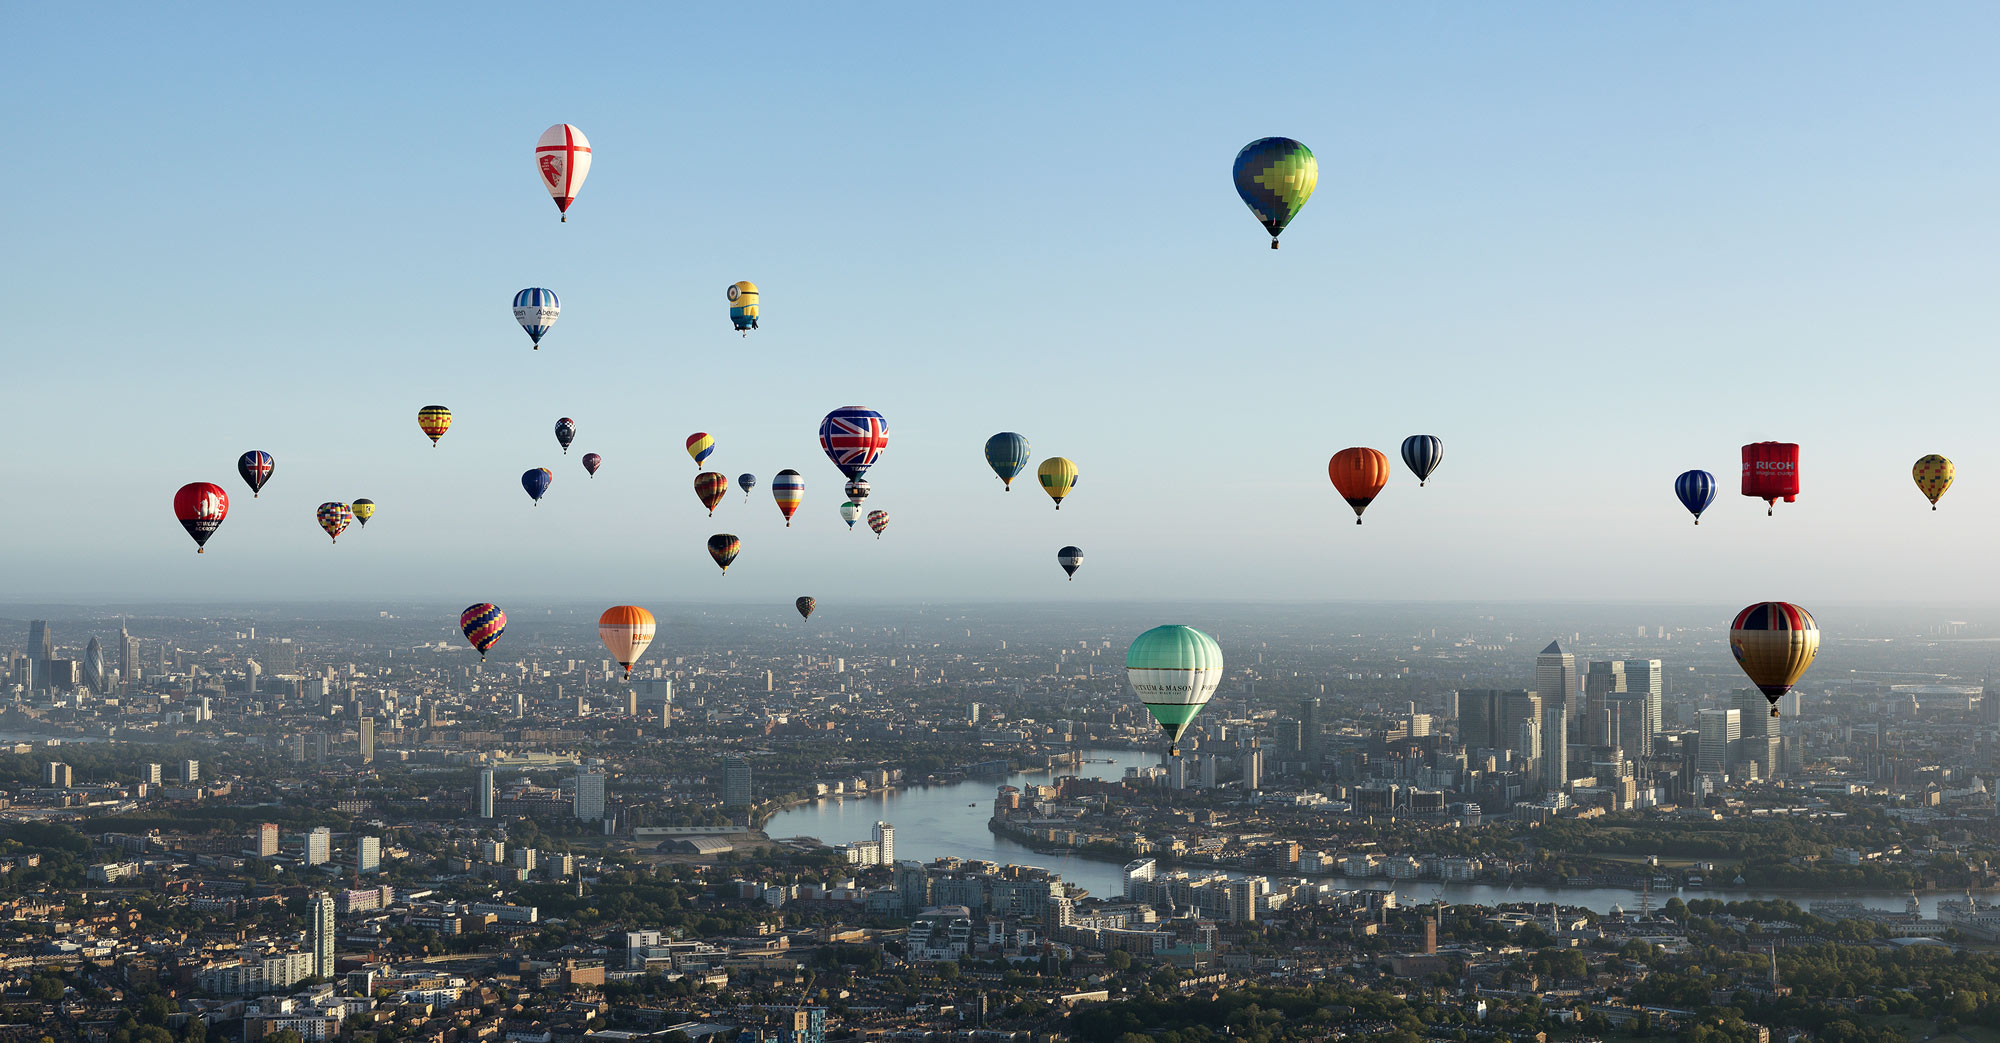 See hot air balloons drifting over central London